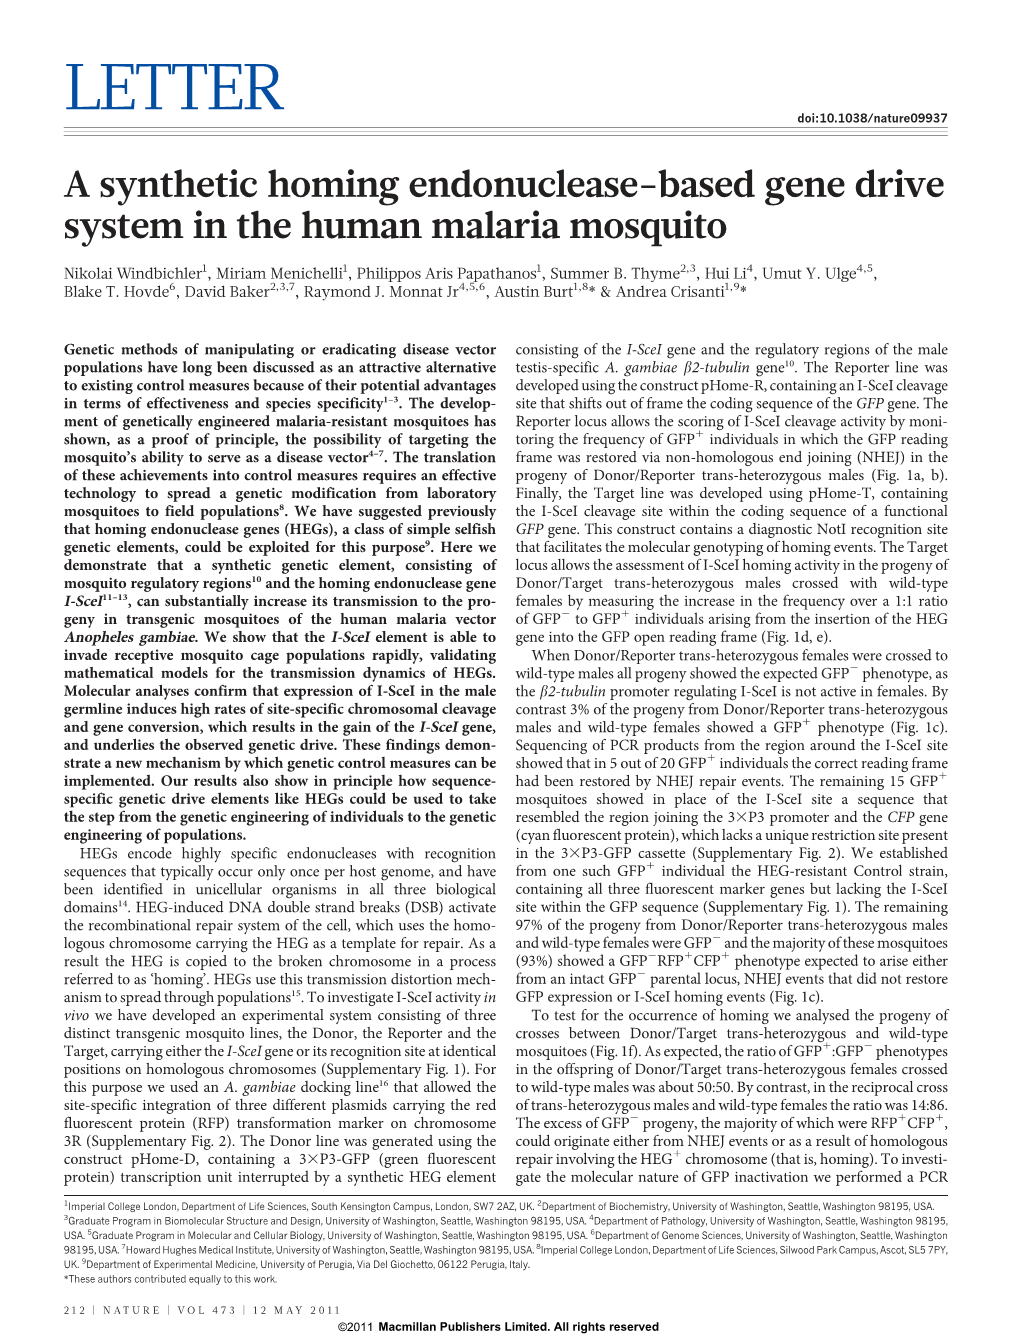 A Synthetic Homing Endonuclease-Based Gene Drive System in the Human Malaria Mosquito